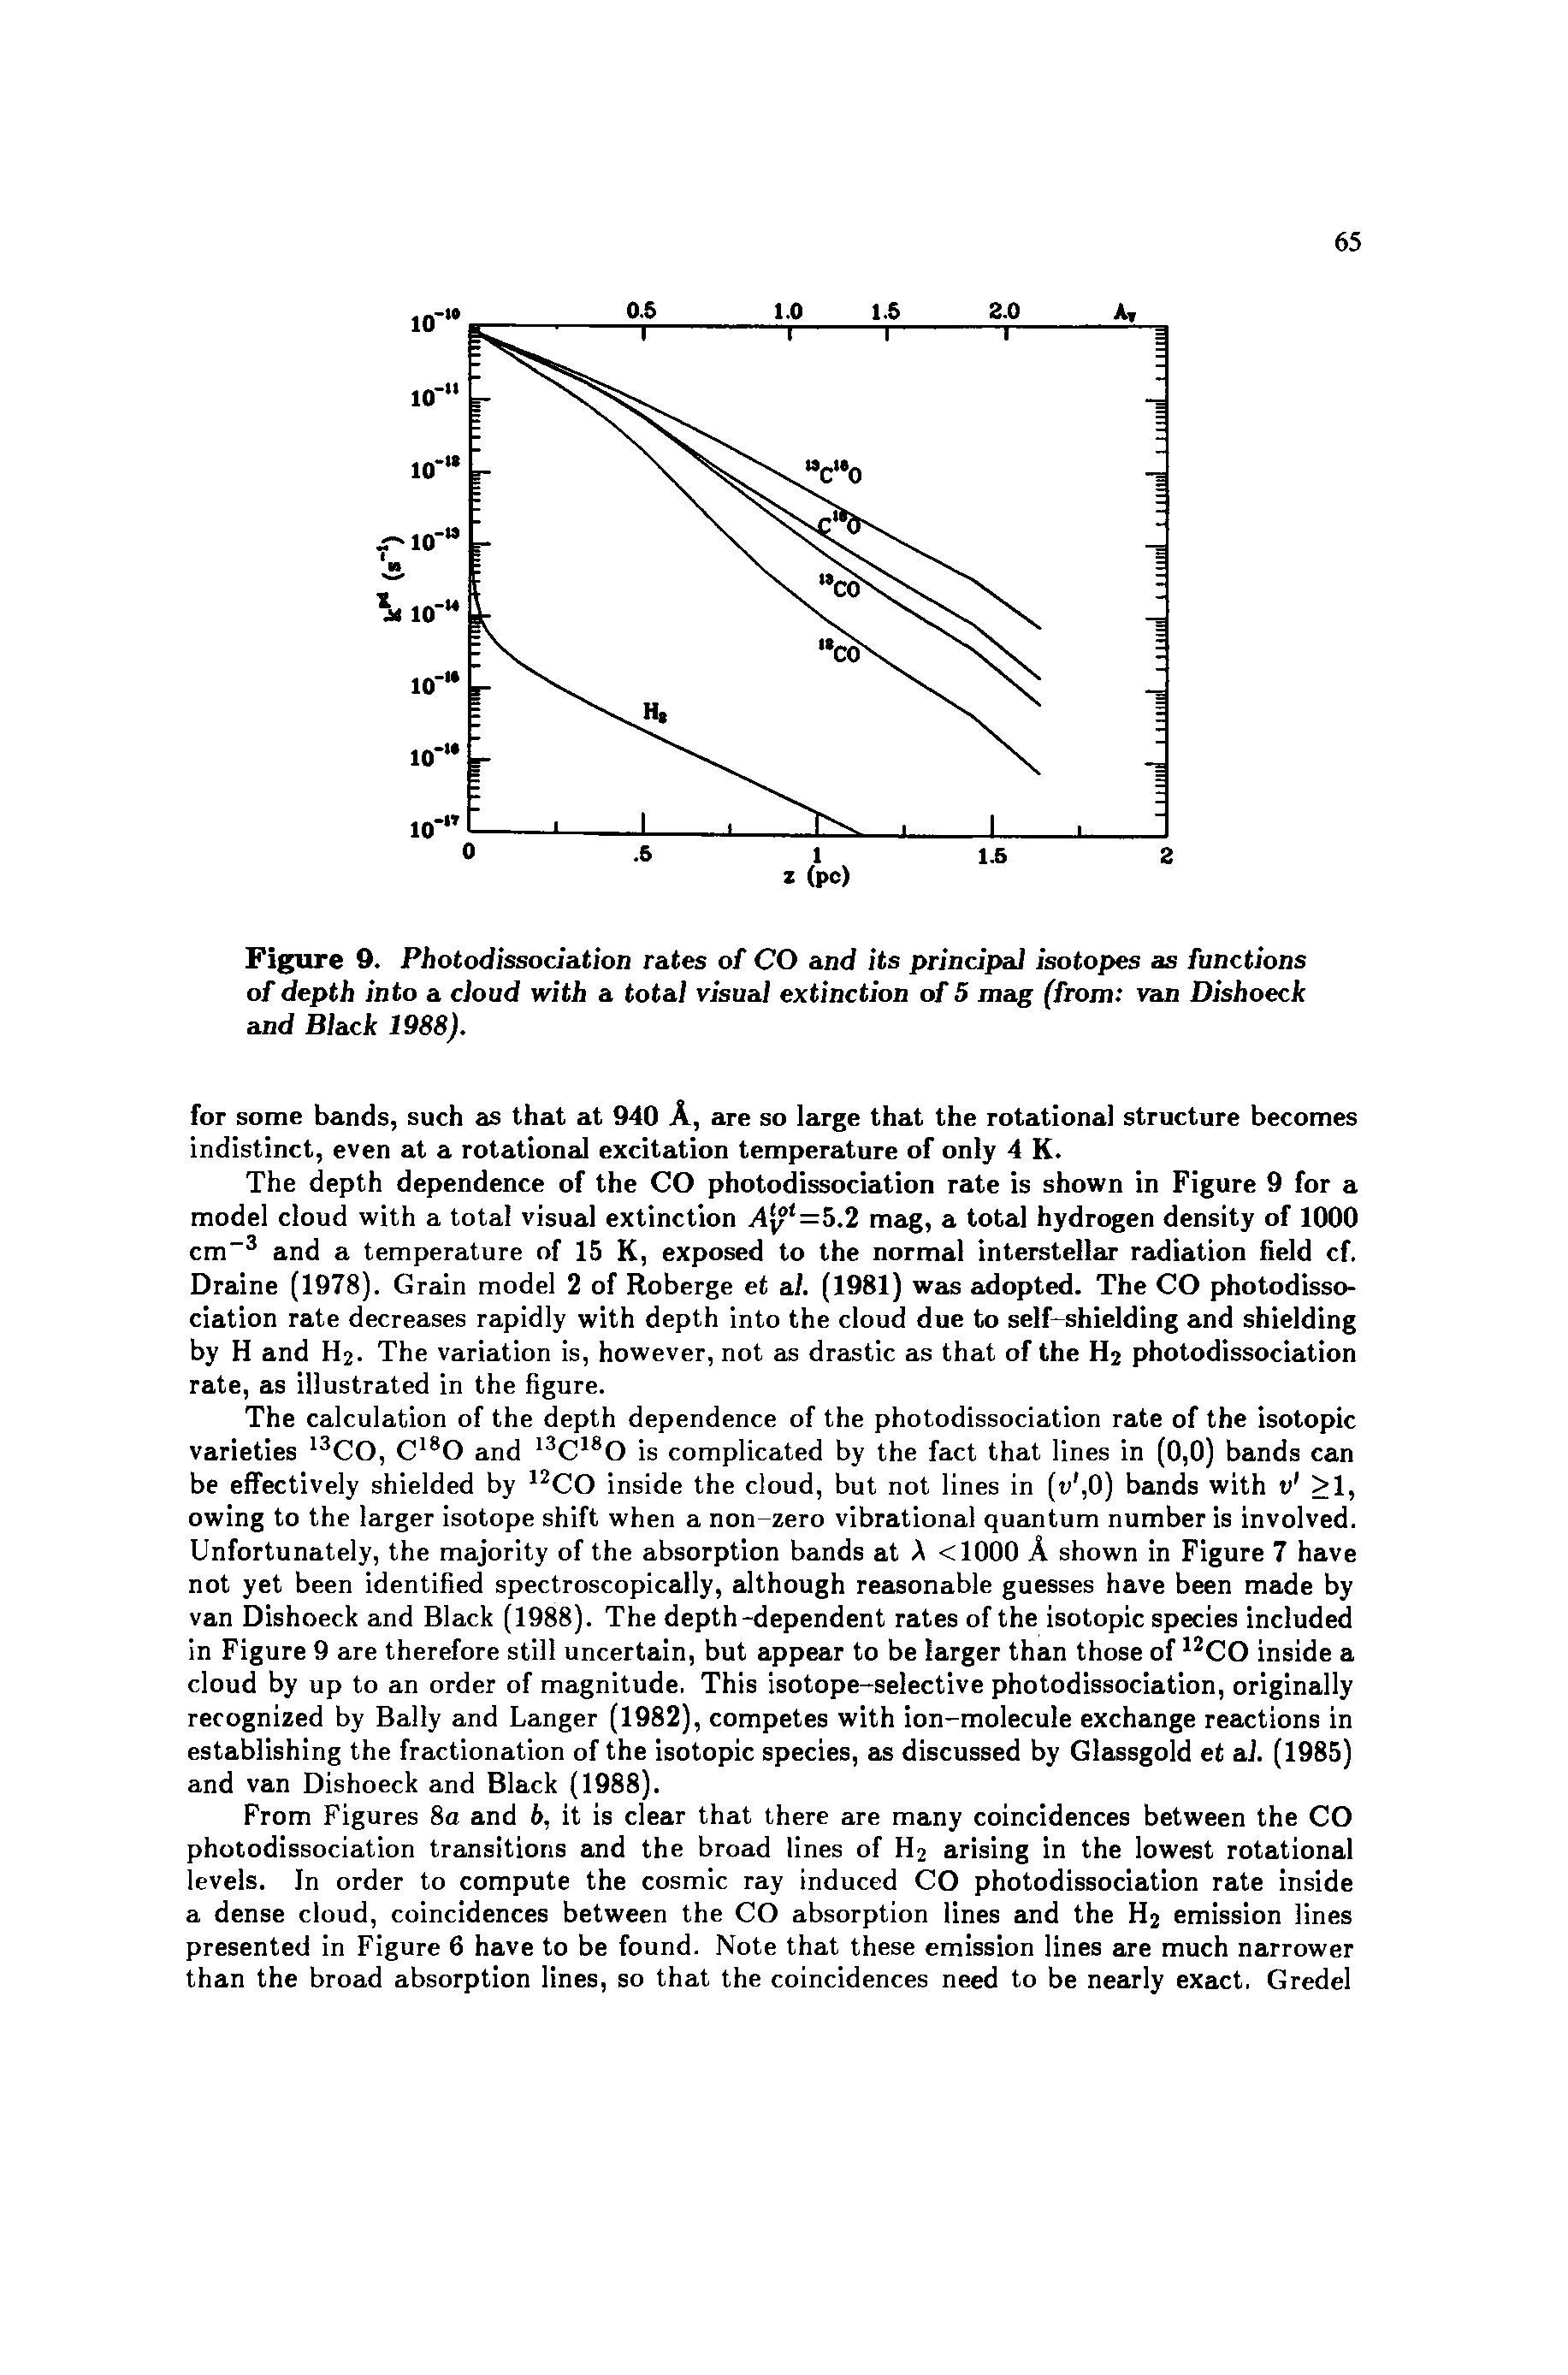 Figure 9. Photodissoda.tion rates of CO and its principal isotopes as functions of depth into a cloud with a total visual extinction of 5 mag (from van Dishoeck and Black 1988).